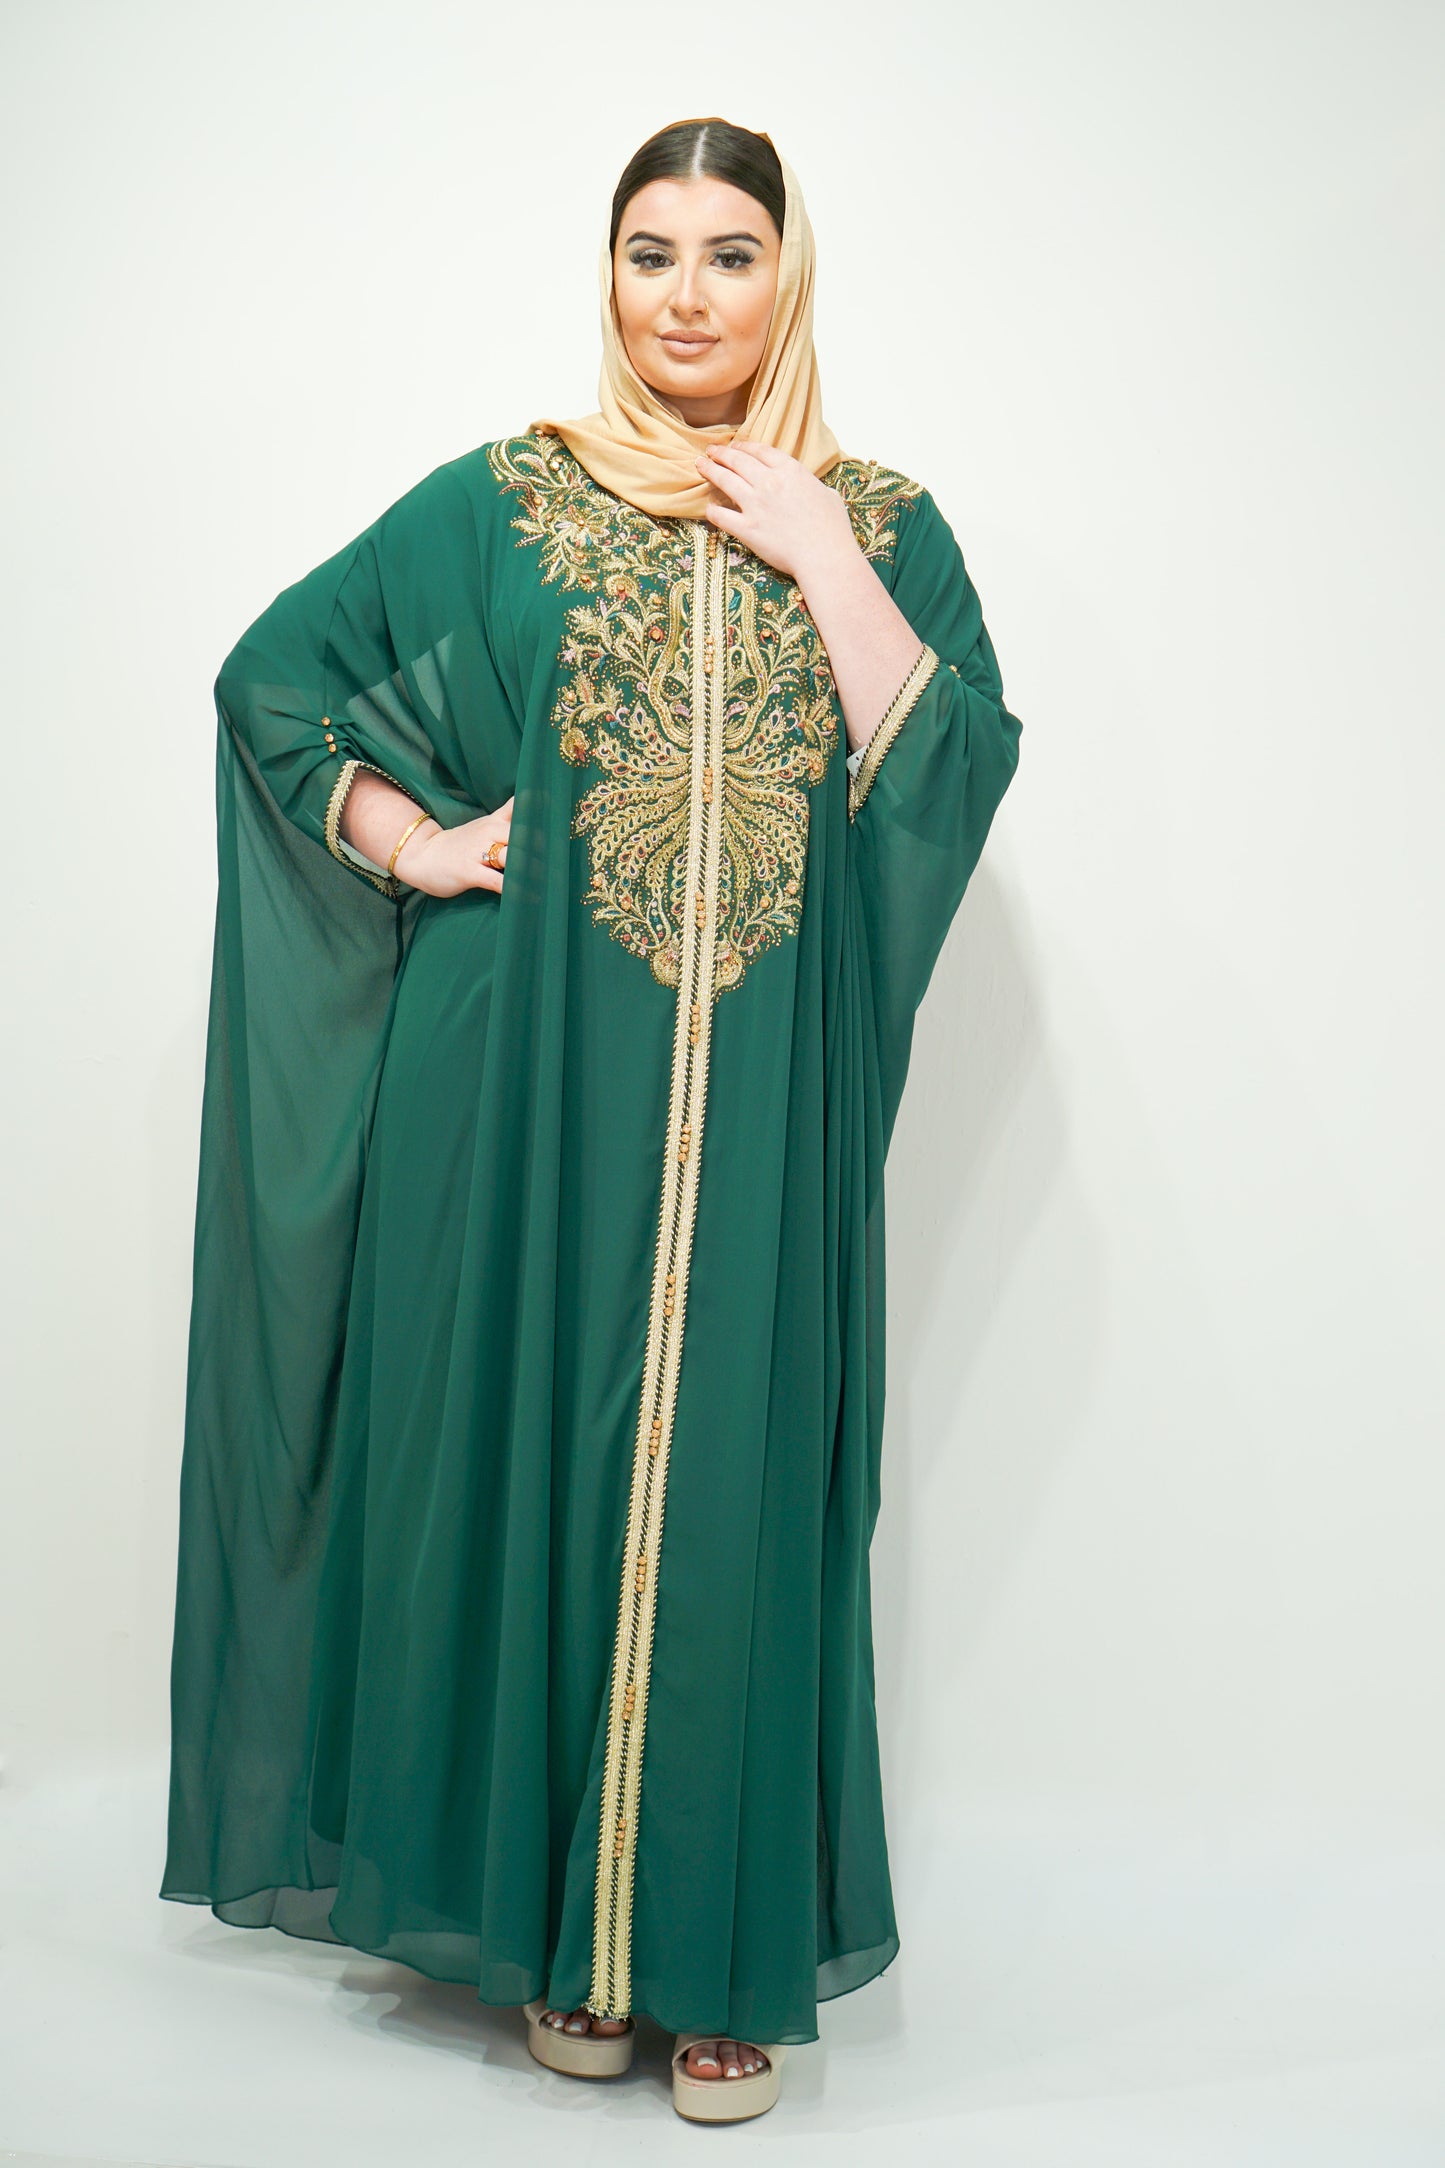 Bottle Green Chiffon Farasha Abaya with Exquisite Embroidery and Stone Accents